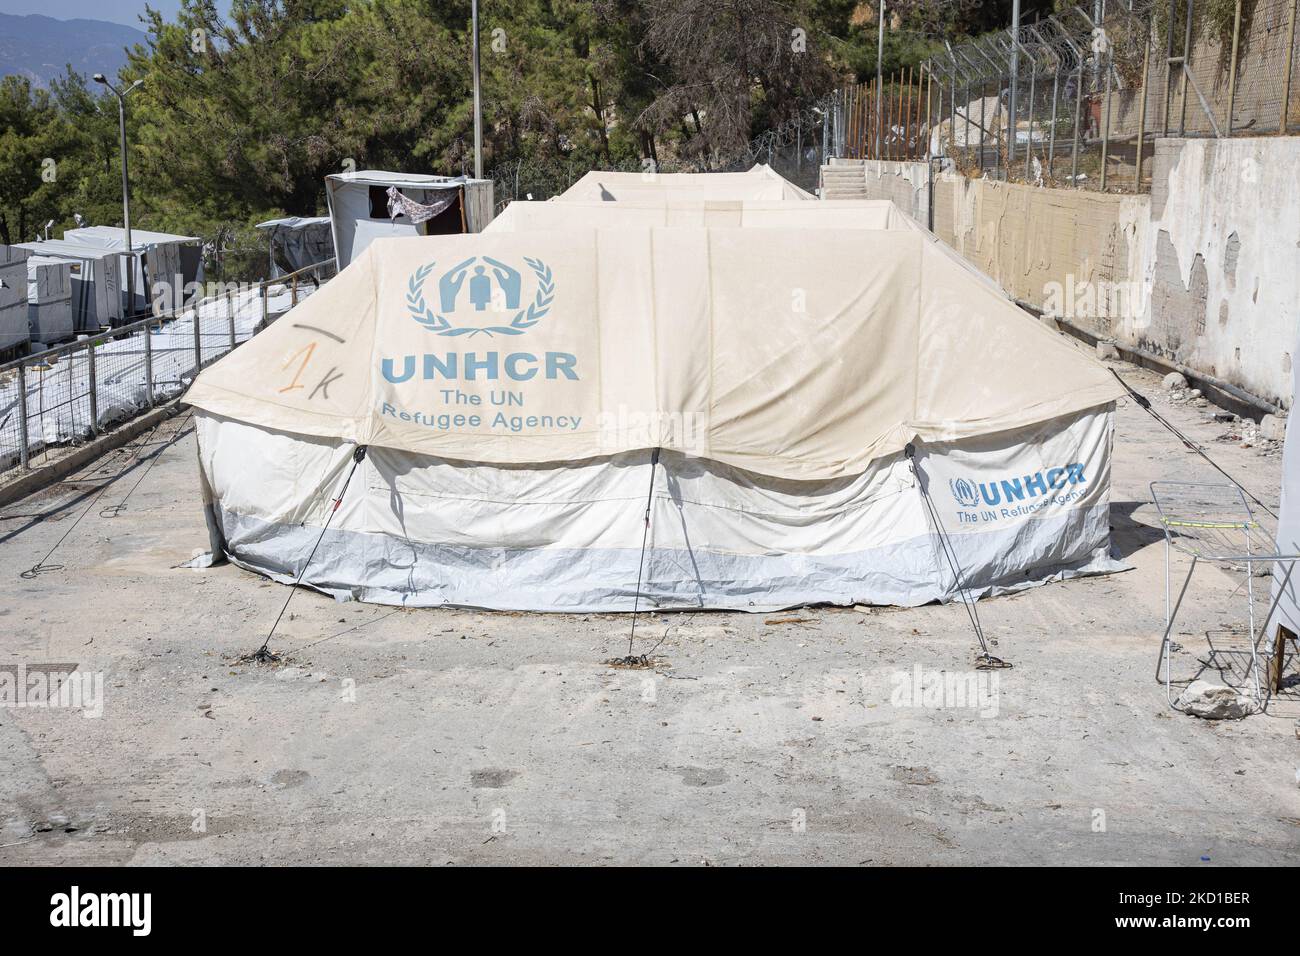 White tents in the official camp with the UNHCR - THE UN Refugee agency logo. The former official refugee - migrant camp surrounded by barbed wire fence at Vathy of Samos Island and the neighboring makeshift camp with handmade tents and some from UNHCR that is located just next to the houses of Vathi town, as seen deserted. The camp has been emptied and people relocated or moved with the police escort to the new camp and some very few houses. Once this facility hosted at its peak 7500 asylum seekers at the official facilities but also the makeshift camp in the forest that was nicknamed The Jun Stock Photo